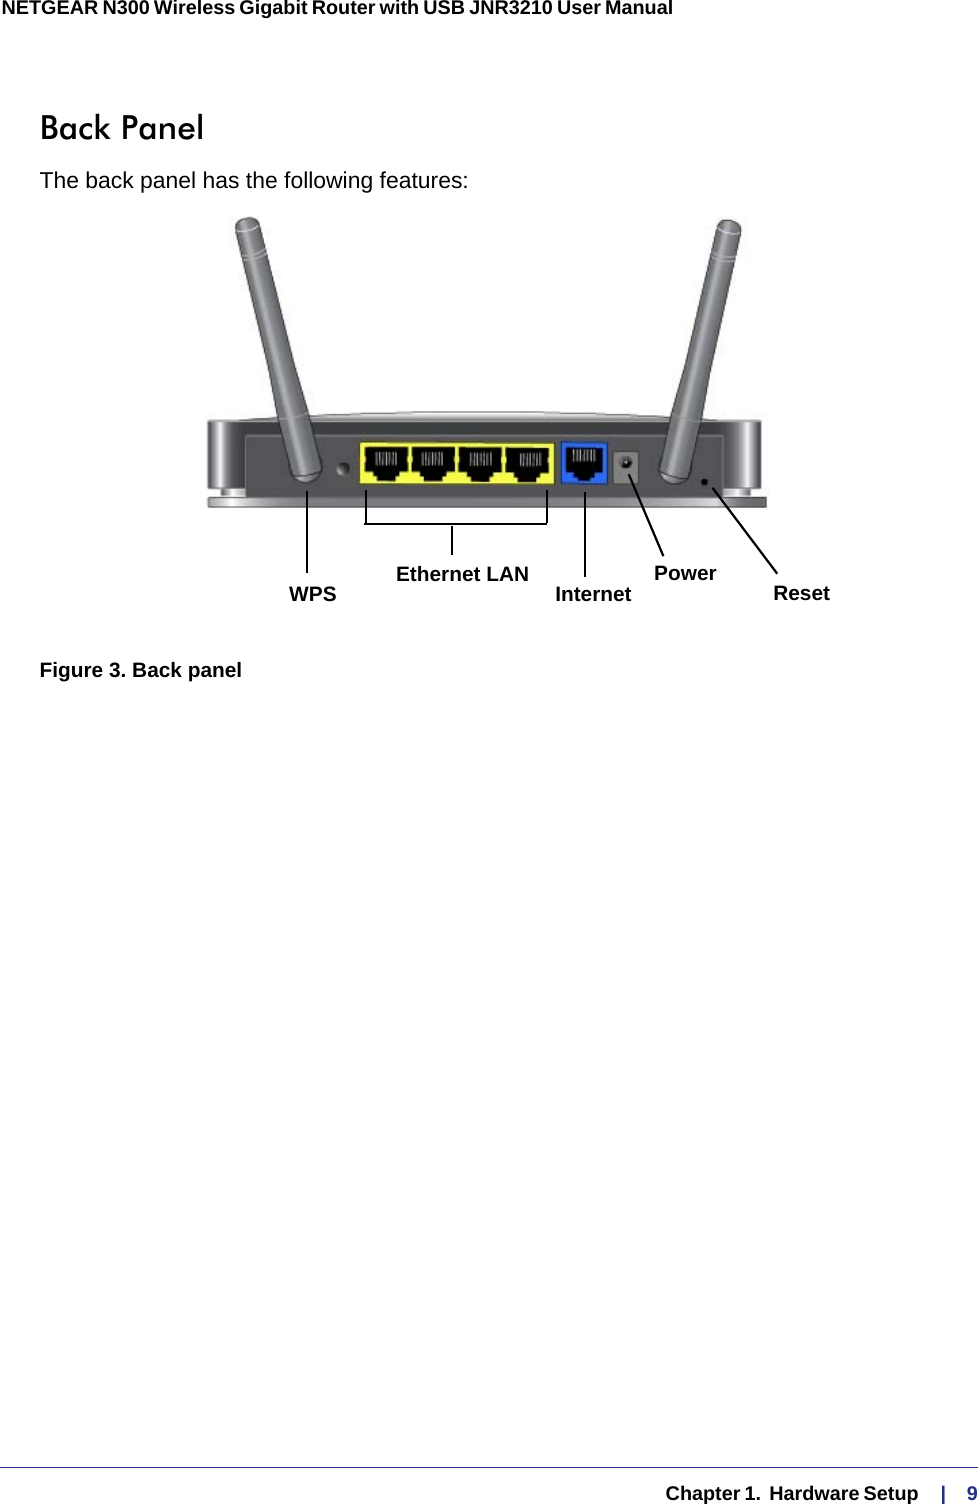   Chapter 1.  Hardware Setup    |    9NETGEAR N300 Wireless Gigabit Router with USB JNR3210 User Manual Back PanelThe back panel has the following features:WPS Ethernet LAN Internet Power ResetFigure 3. Back panel